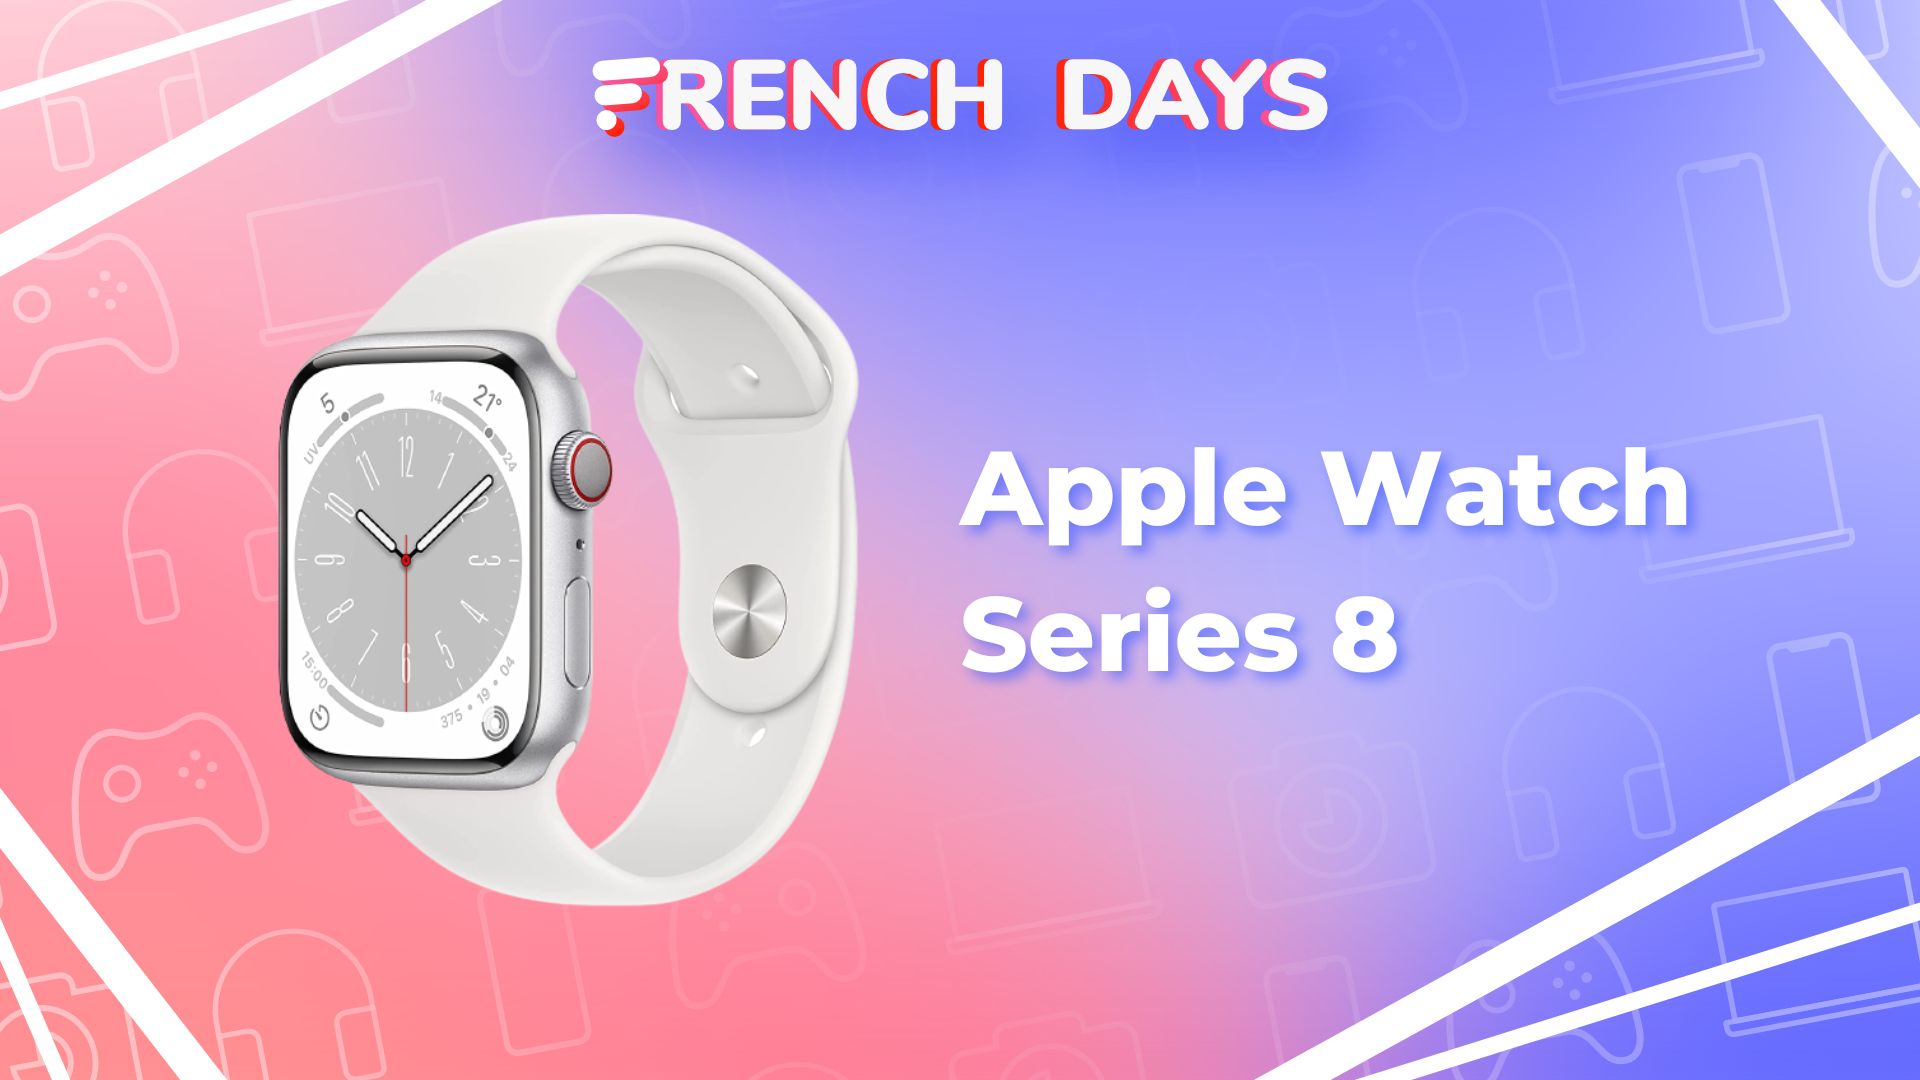 The best offers to buy an Apple Watch Series 8 during the French Days